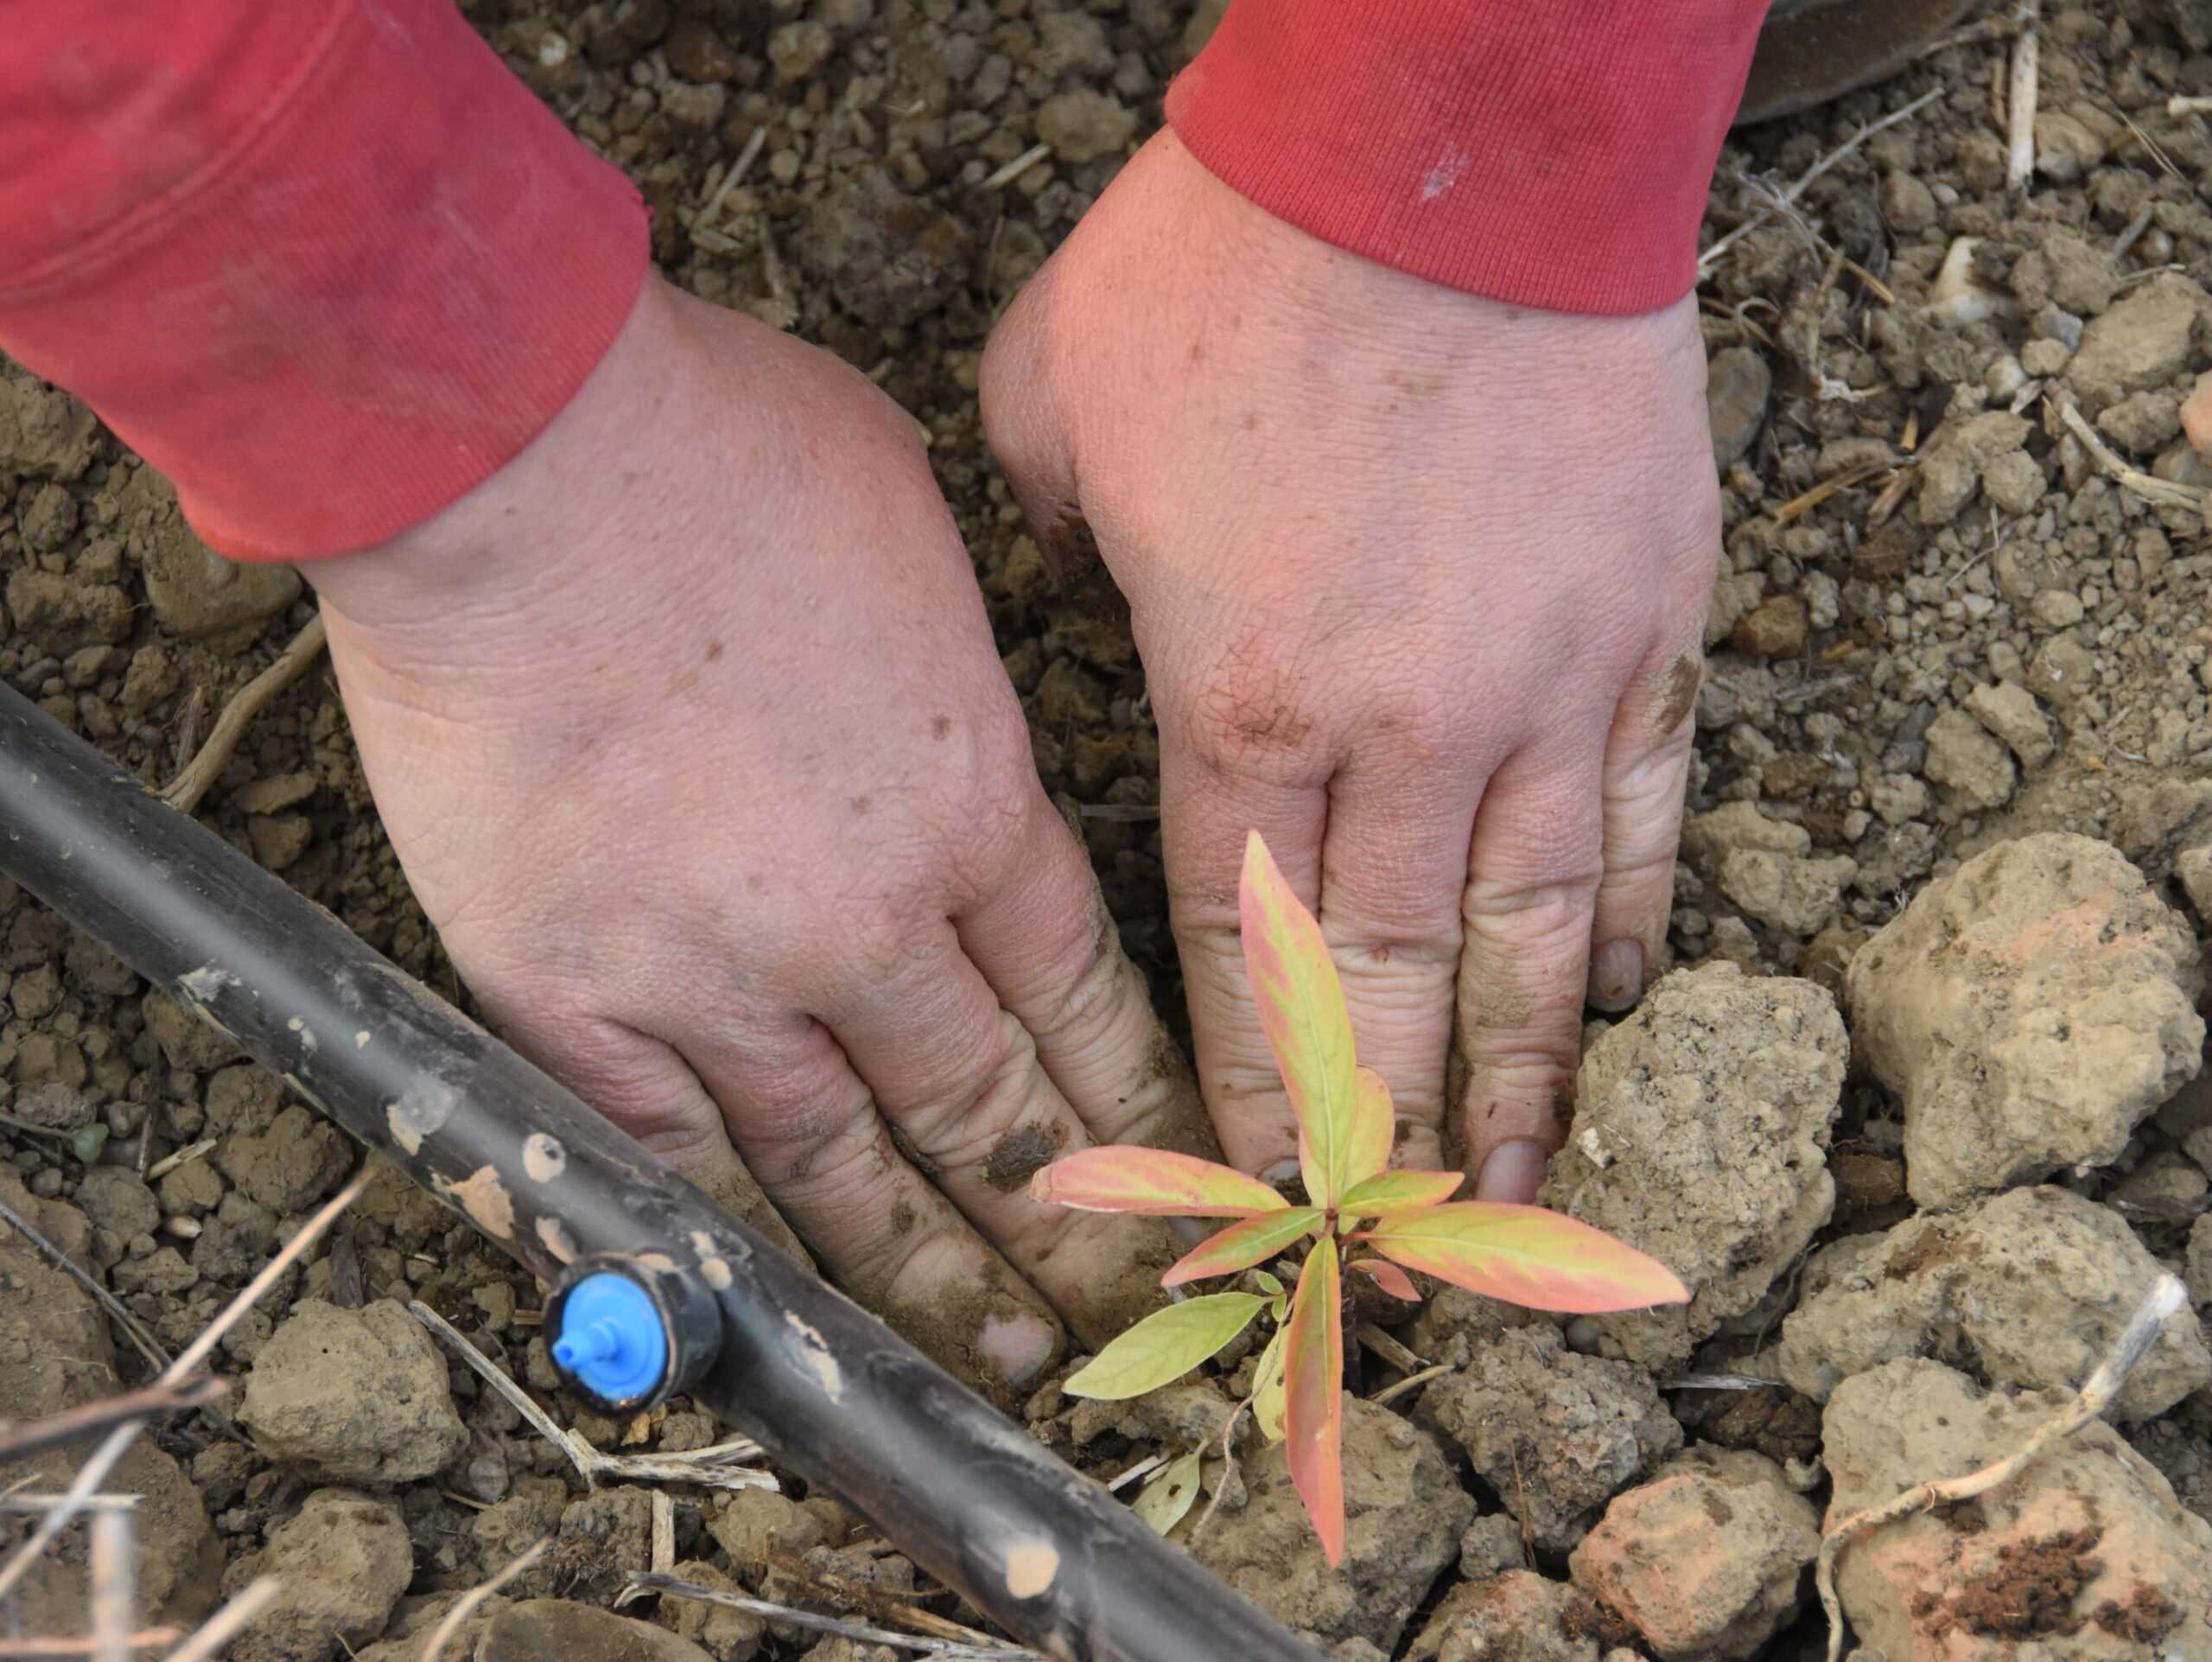 A person's hands planting a seedling into rocky soil.